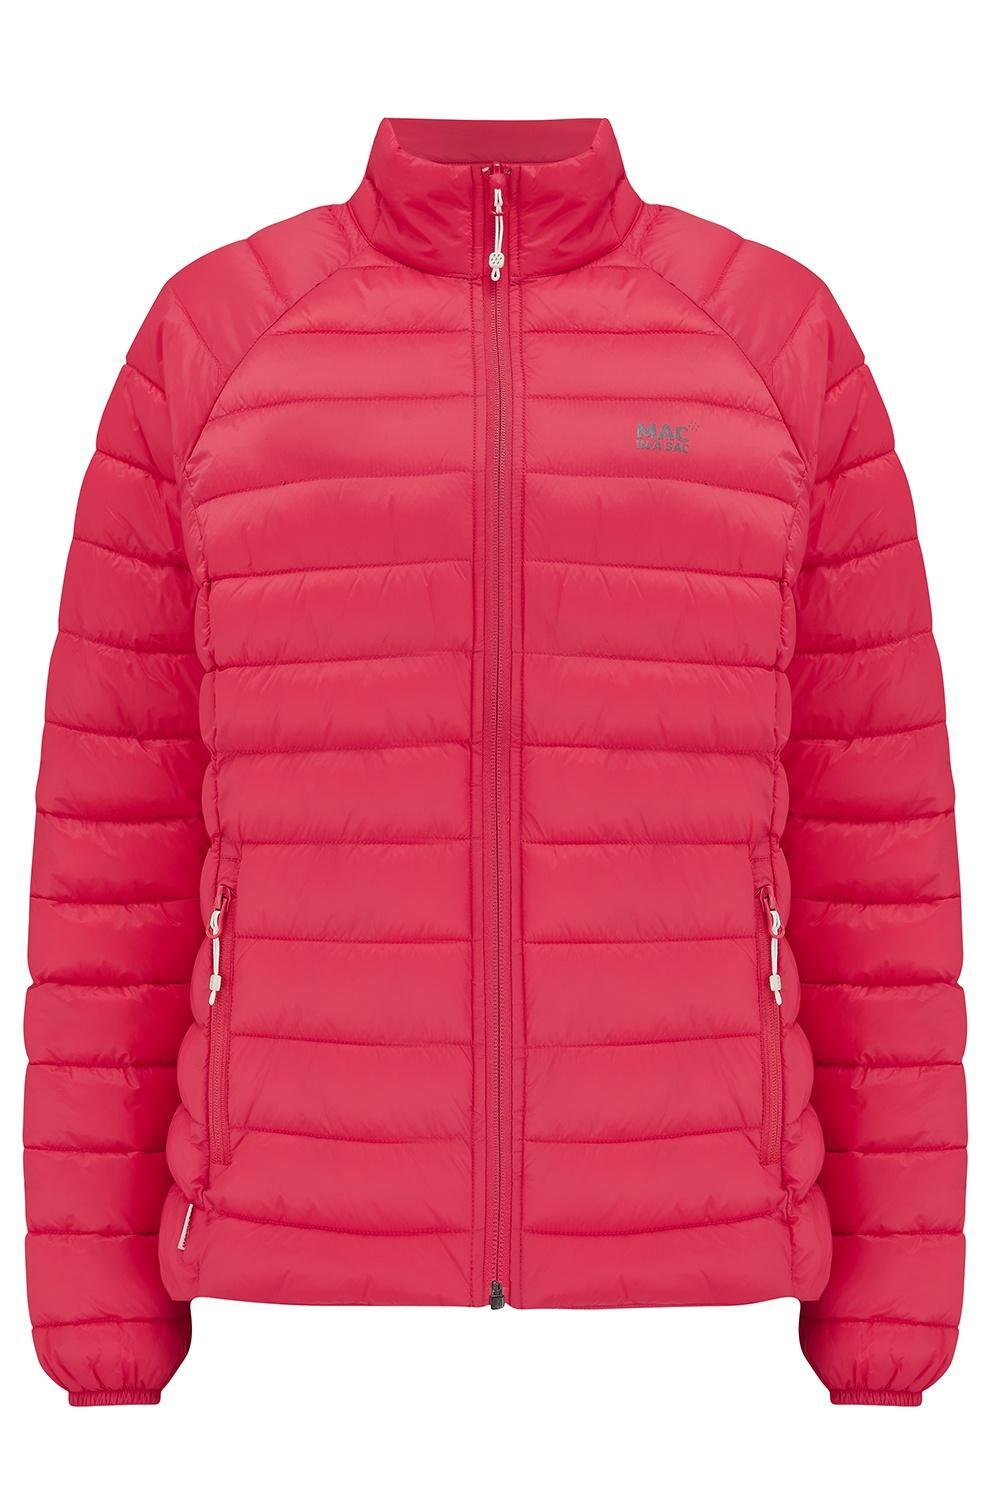 MAC IN A SAC Synergy Womens Insulated Jacket